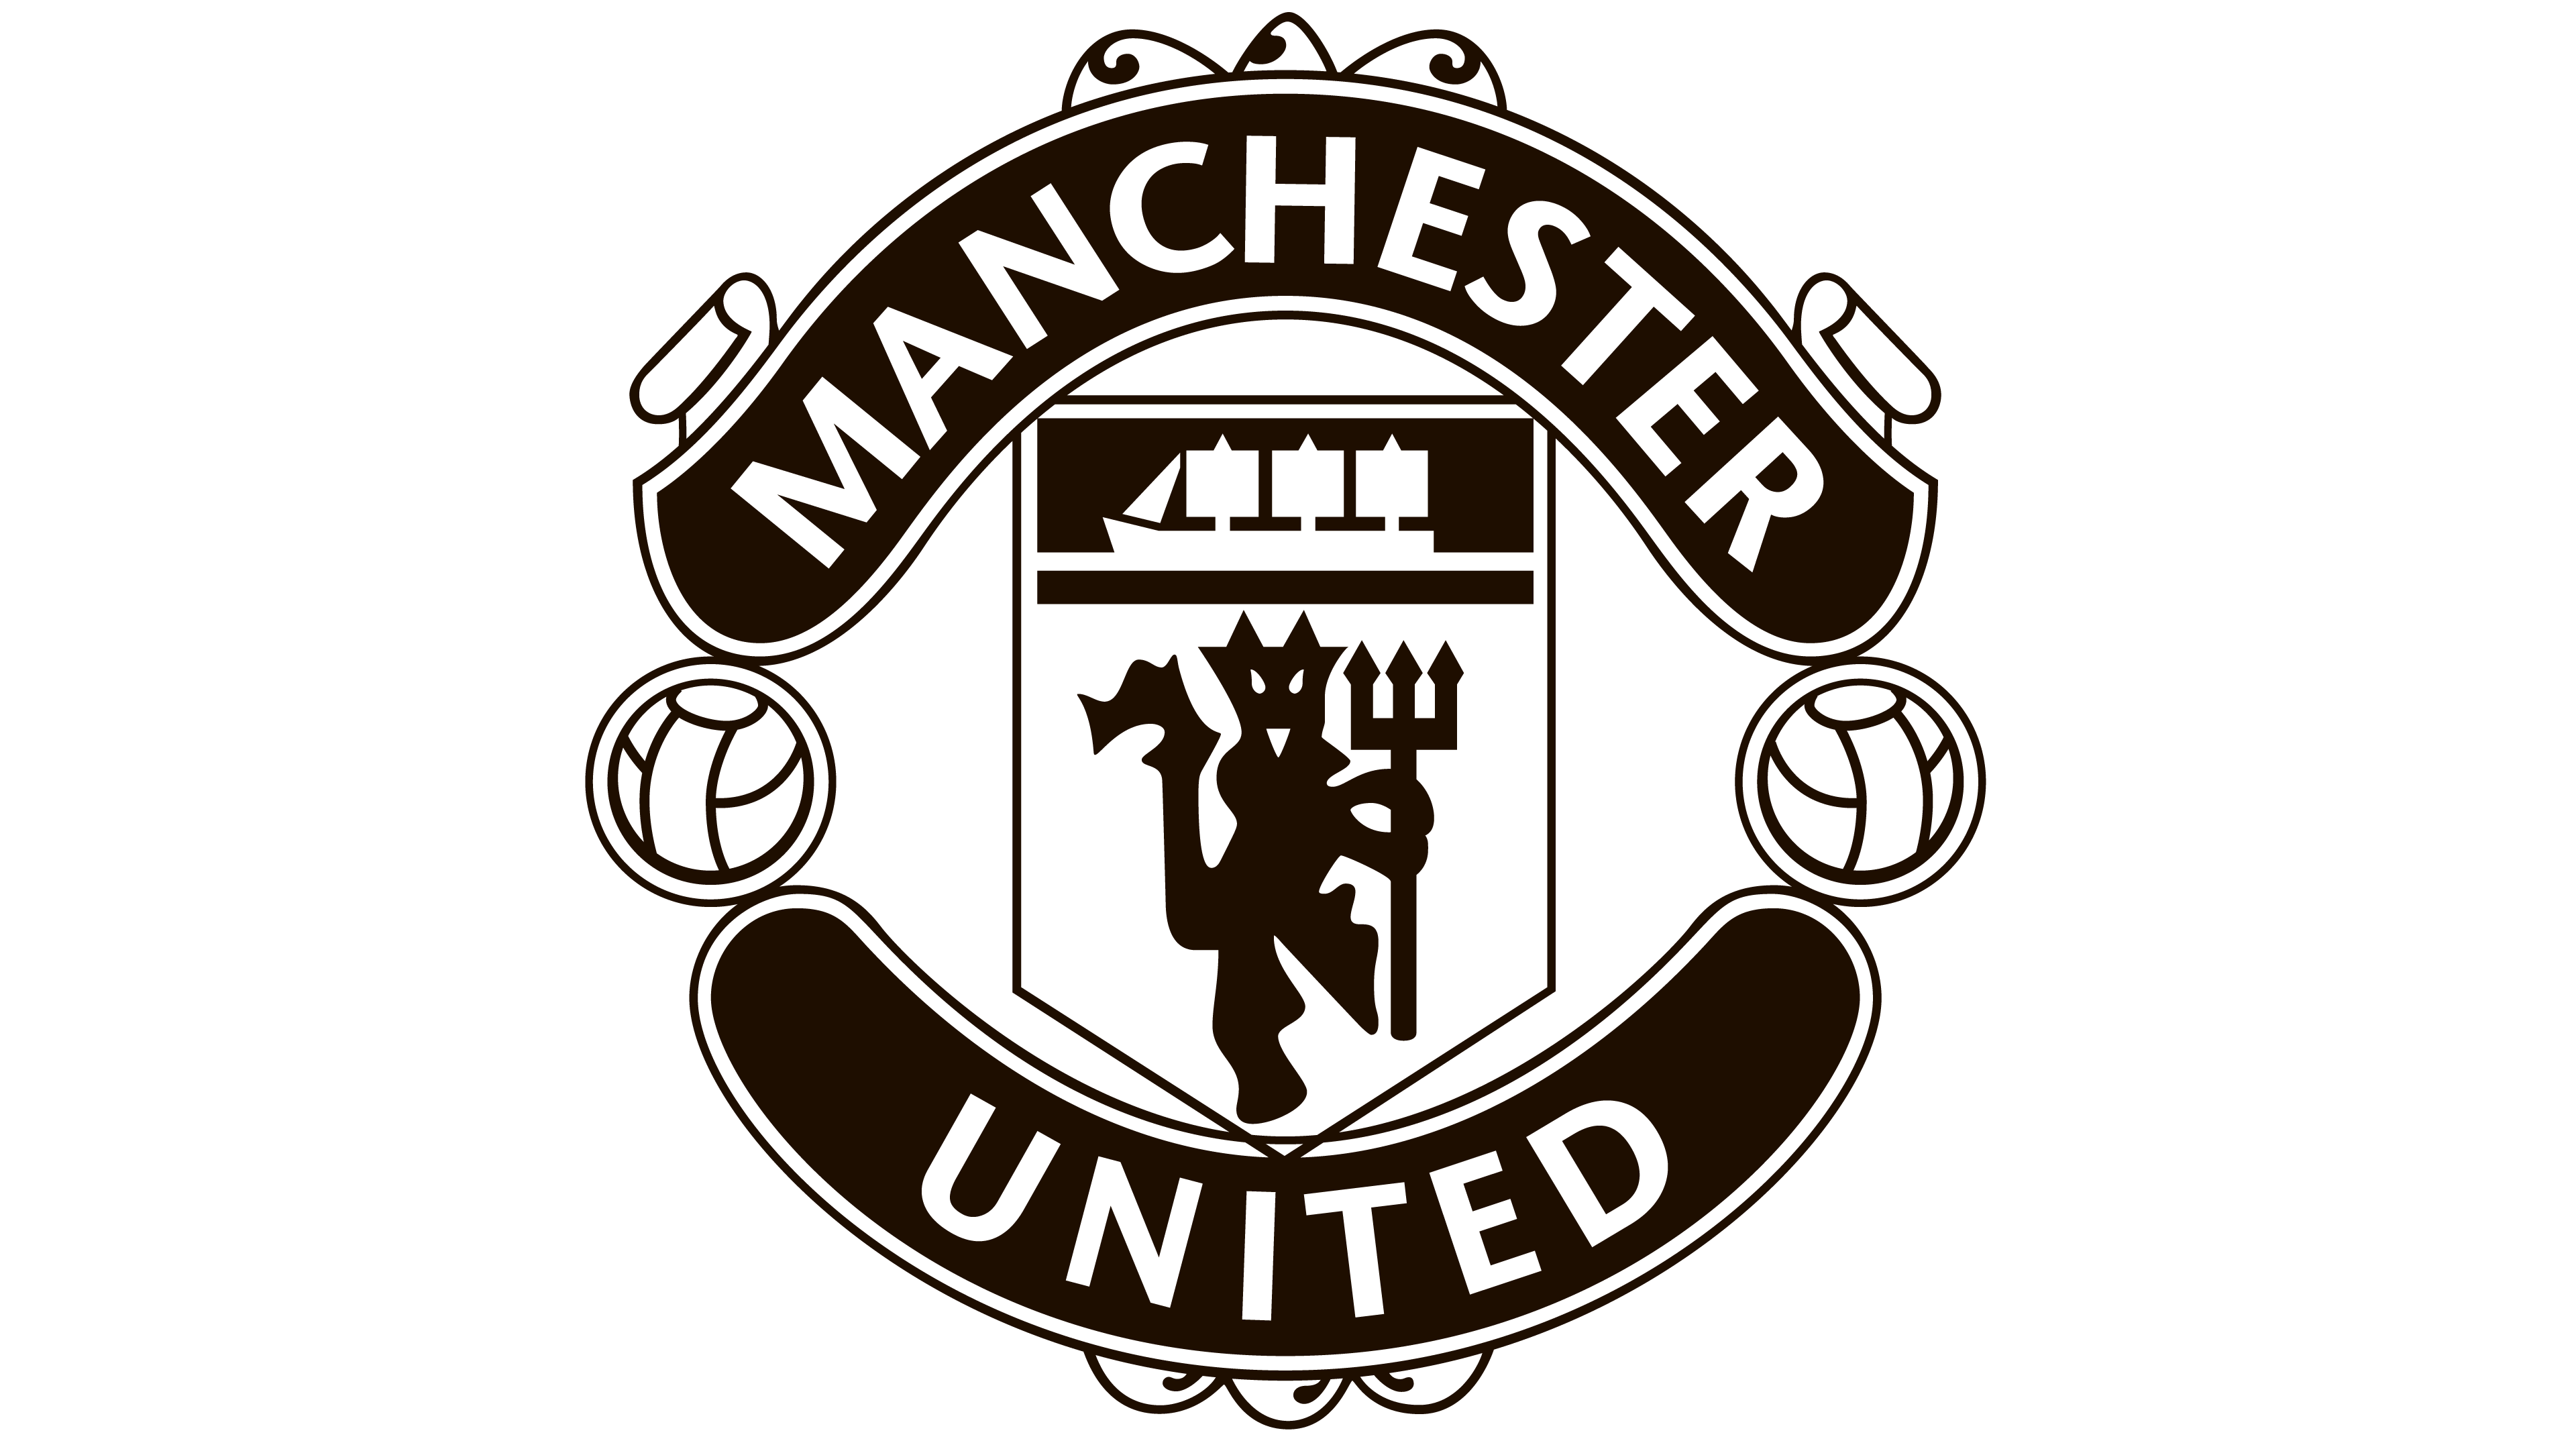 Manchester United Logo. The most famous brands and company logos